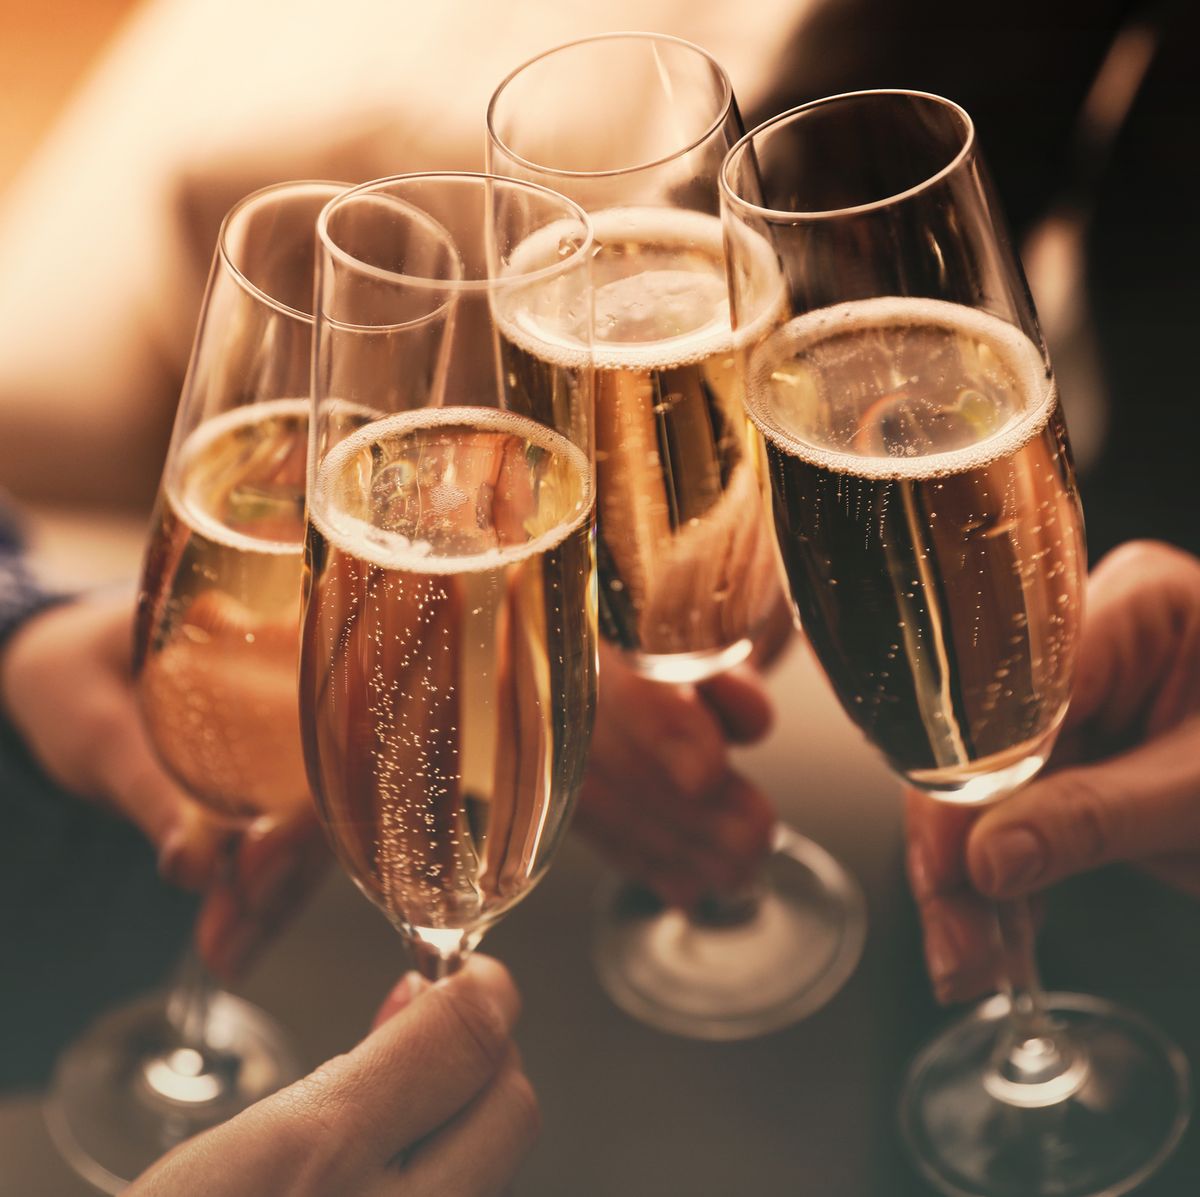 Why Do We Celebrate with Champagne?